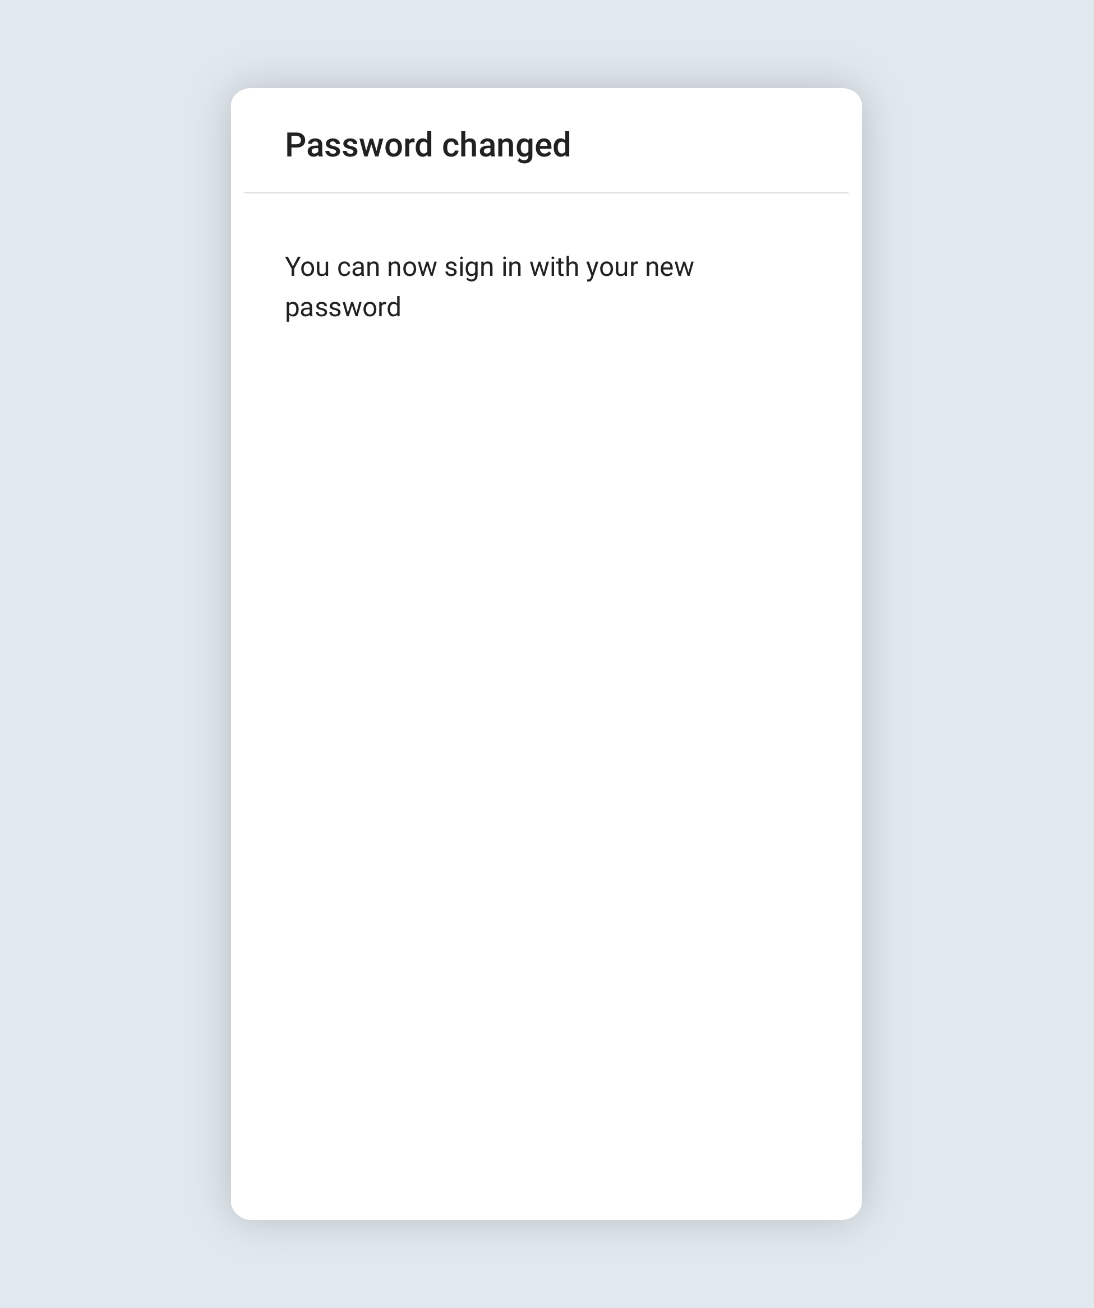 Password changed confirmation screen